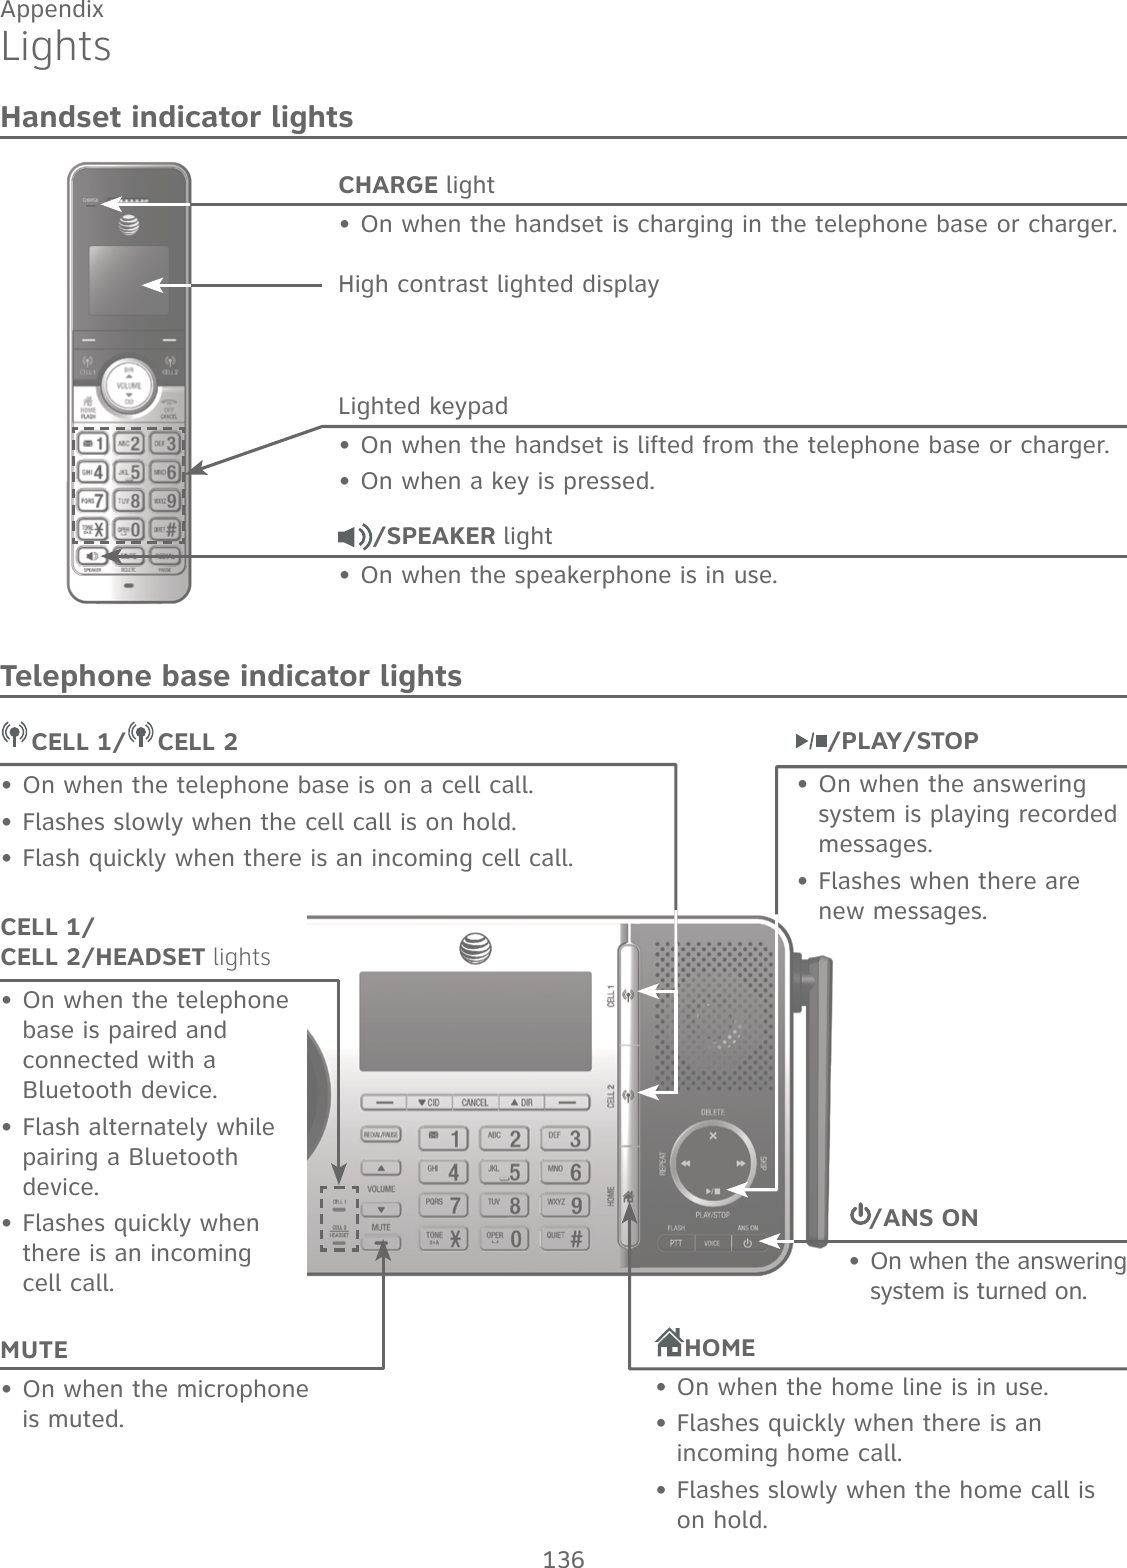 136AppendixHandset indicator lightsTelephone base indicator lightsLightsCELL 1/ CELL 2/HEADSET lightsOn when the telephone base is paired and connected with a Bluetooth device.Flash alternately while pairing a Bluetooth device.Flashes quickly when there is an incoming cell call.•••CELL 1/ CELL 2On when the telephone base is on a cell call.Flashes slowly when the cell call is on hold.Flash quickly when there is an incoming cell call.•••HOMEOn when the home line is in use.Flashes quickly when there is an incoming home call.Flashes slowly when the home call is on hold.•••MUTEOn when the microphone is muted.•CHARGE lightOn when the handset is charging in the telephone base or charger.•High contrast lighted displayLighted keypadOn when the handset is lifted from the telephone base or charger.On when a key is pressed./SPEAKER lightOn when the speakerphone is in use.•••/PLAY/STOPOn when the answering system is playing recorded messages.Flashes when there are new messages.••/ANS ONOn when the answering system is turned on.•